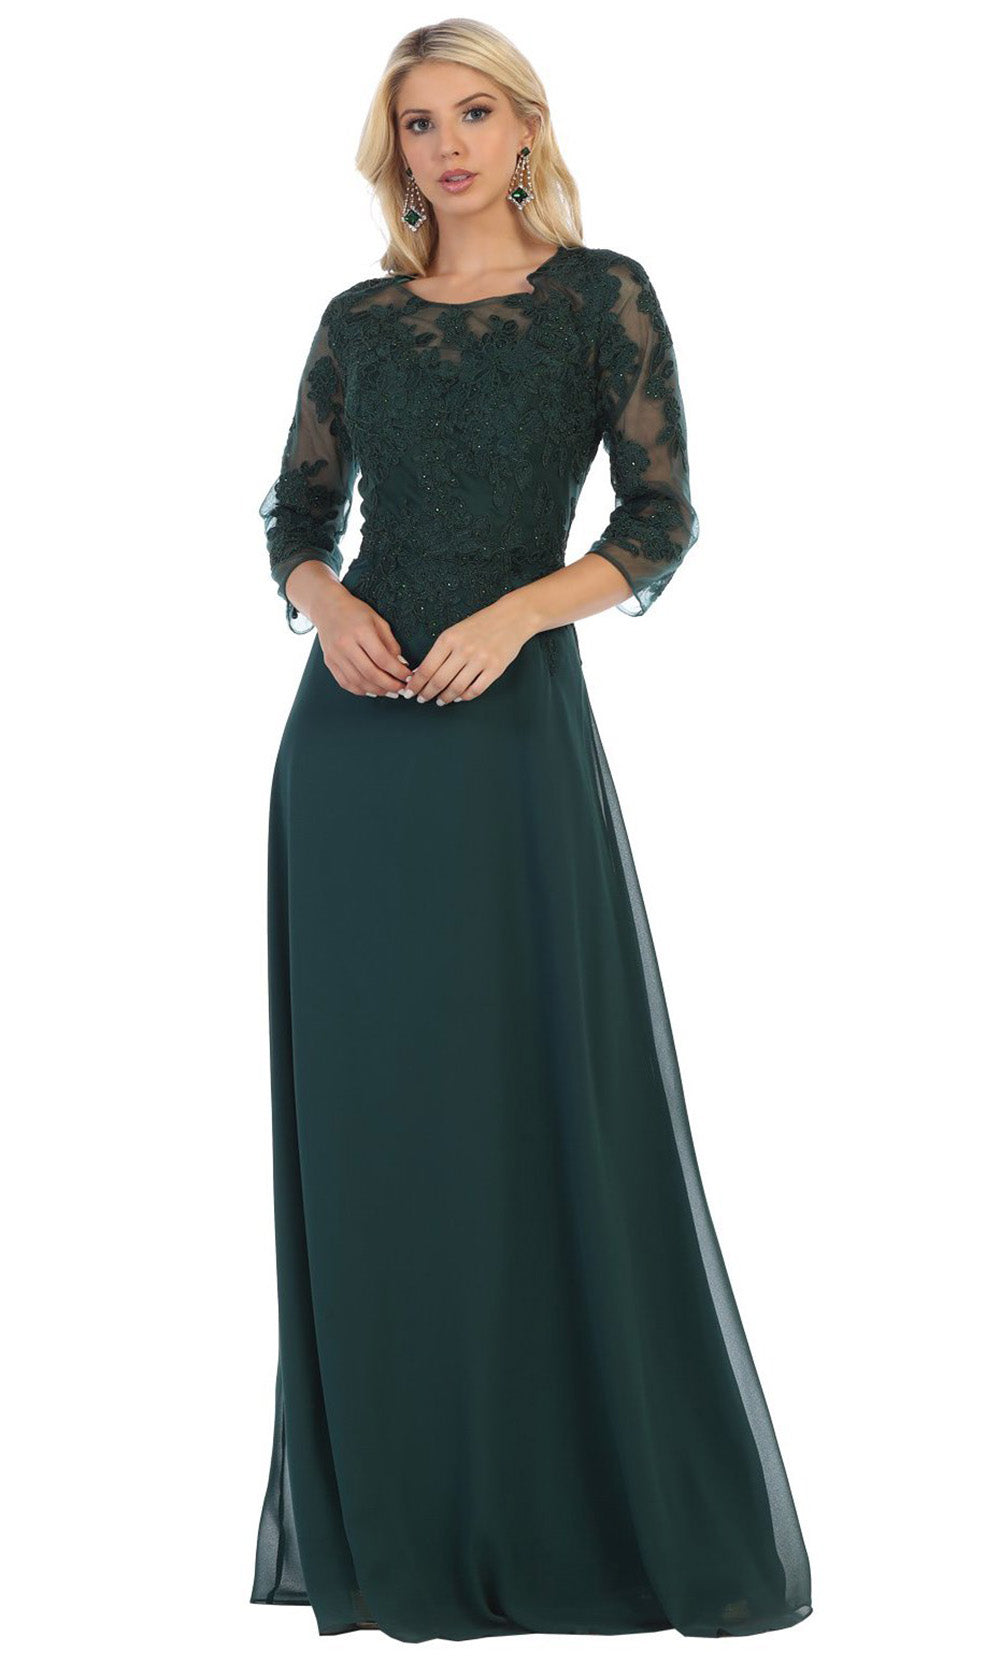 May Queen - MQ1637 Illusion Quarter Sleeve Long Dress In Green